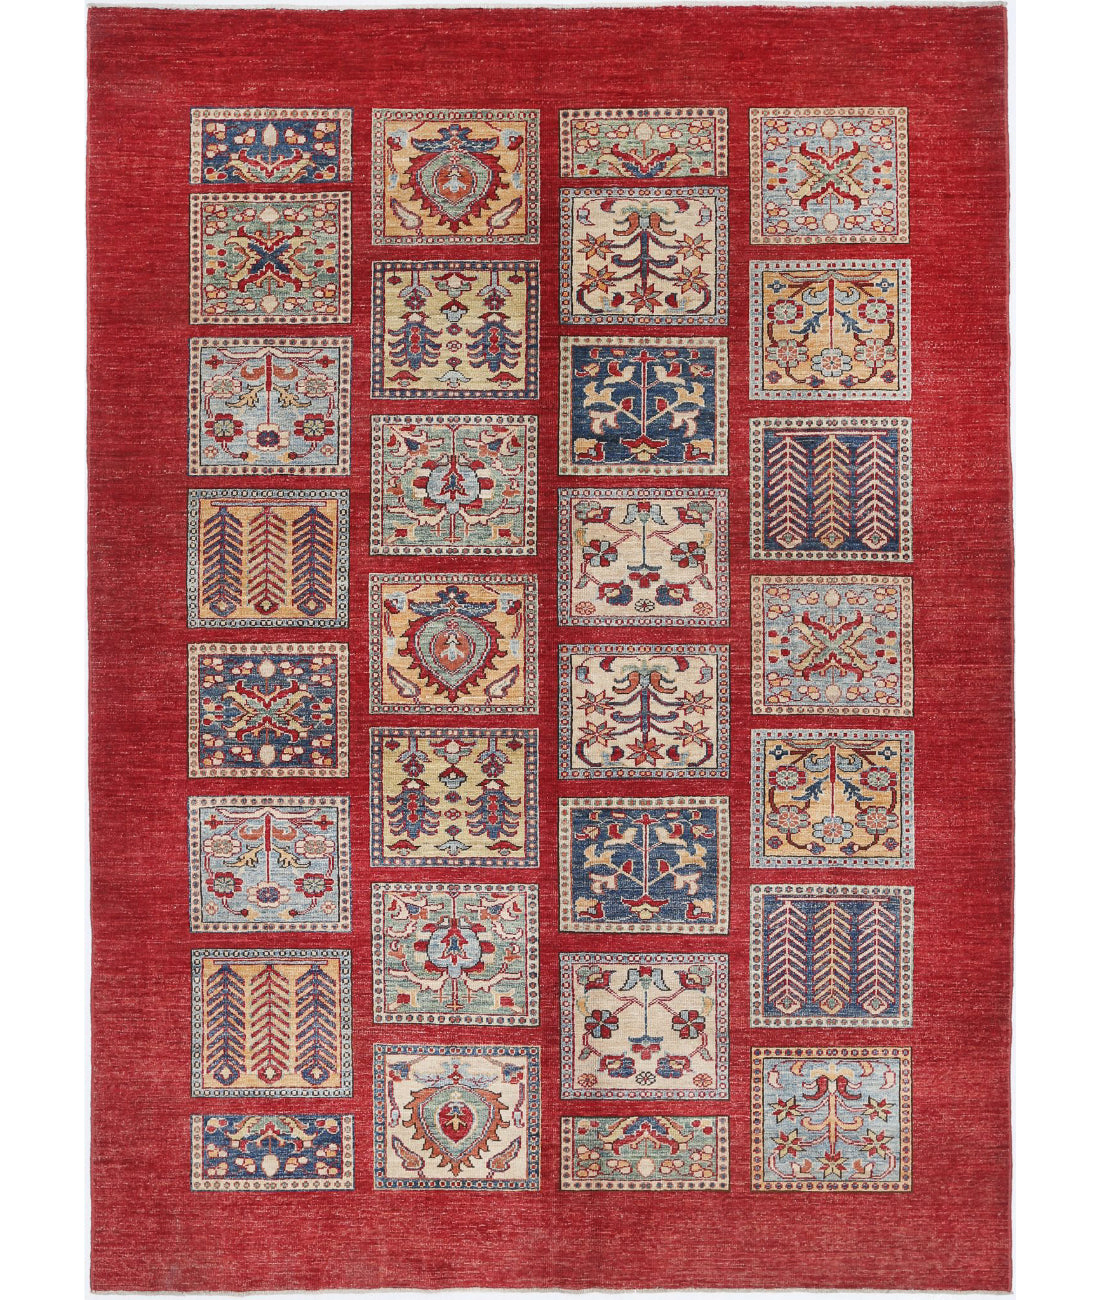 Hand Knotted Bakhtiari Wool Rug - 5'9'' x 8'0'' 5'9'' x 8'0'' (173 X 240) / Red / Red